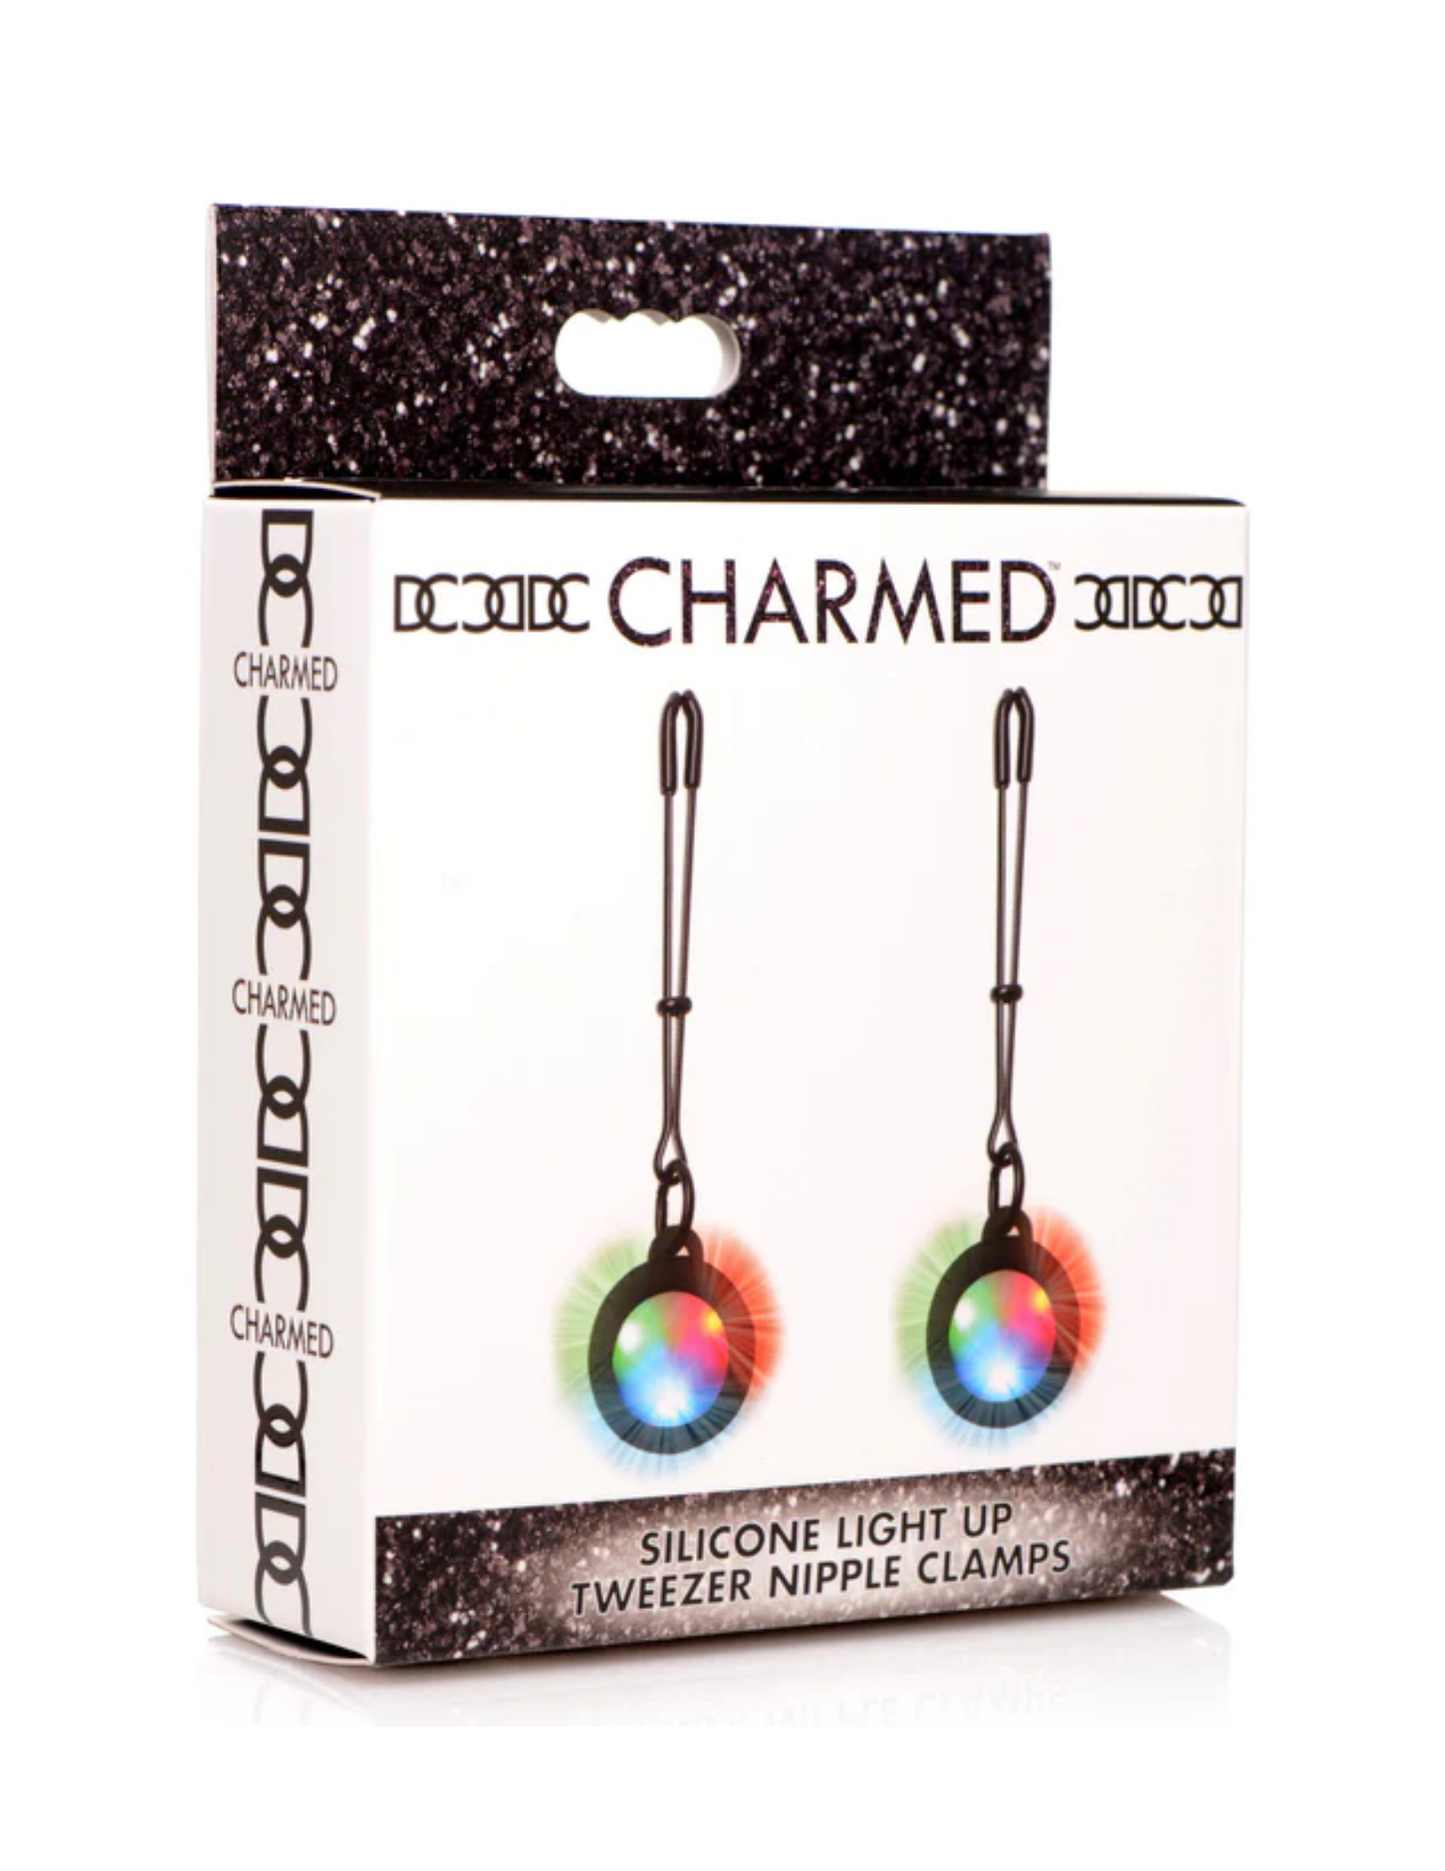 Charmed Silicone Light-up Tweezer Nipple Clamps (in black) in package.